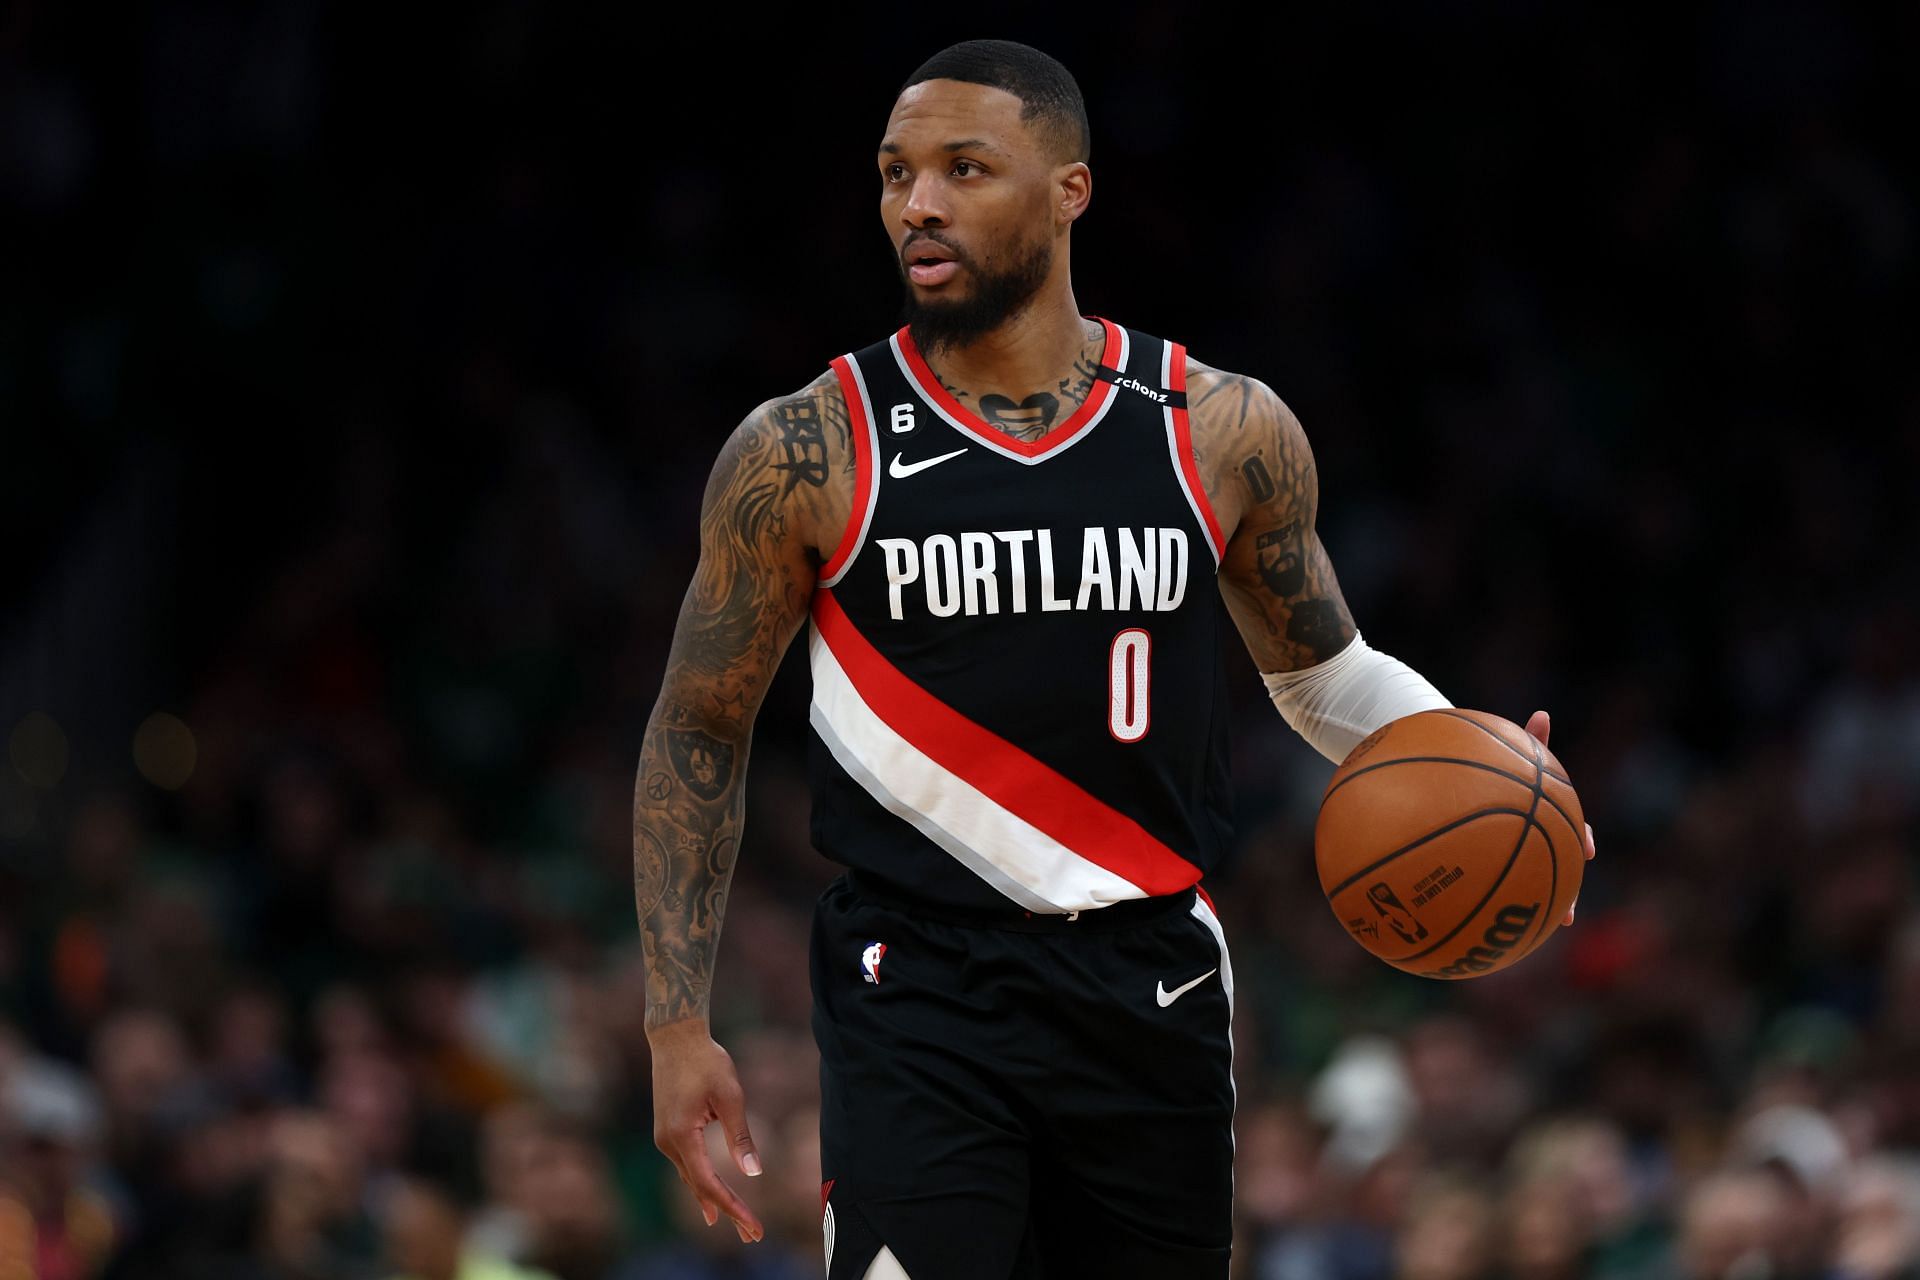 One of the NBA games will feature the Trail Blazers and Damian Lillard (Image via Getty Images)